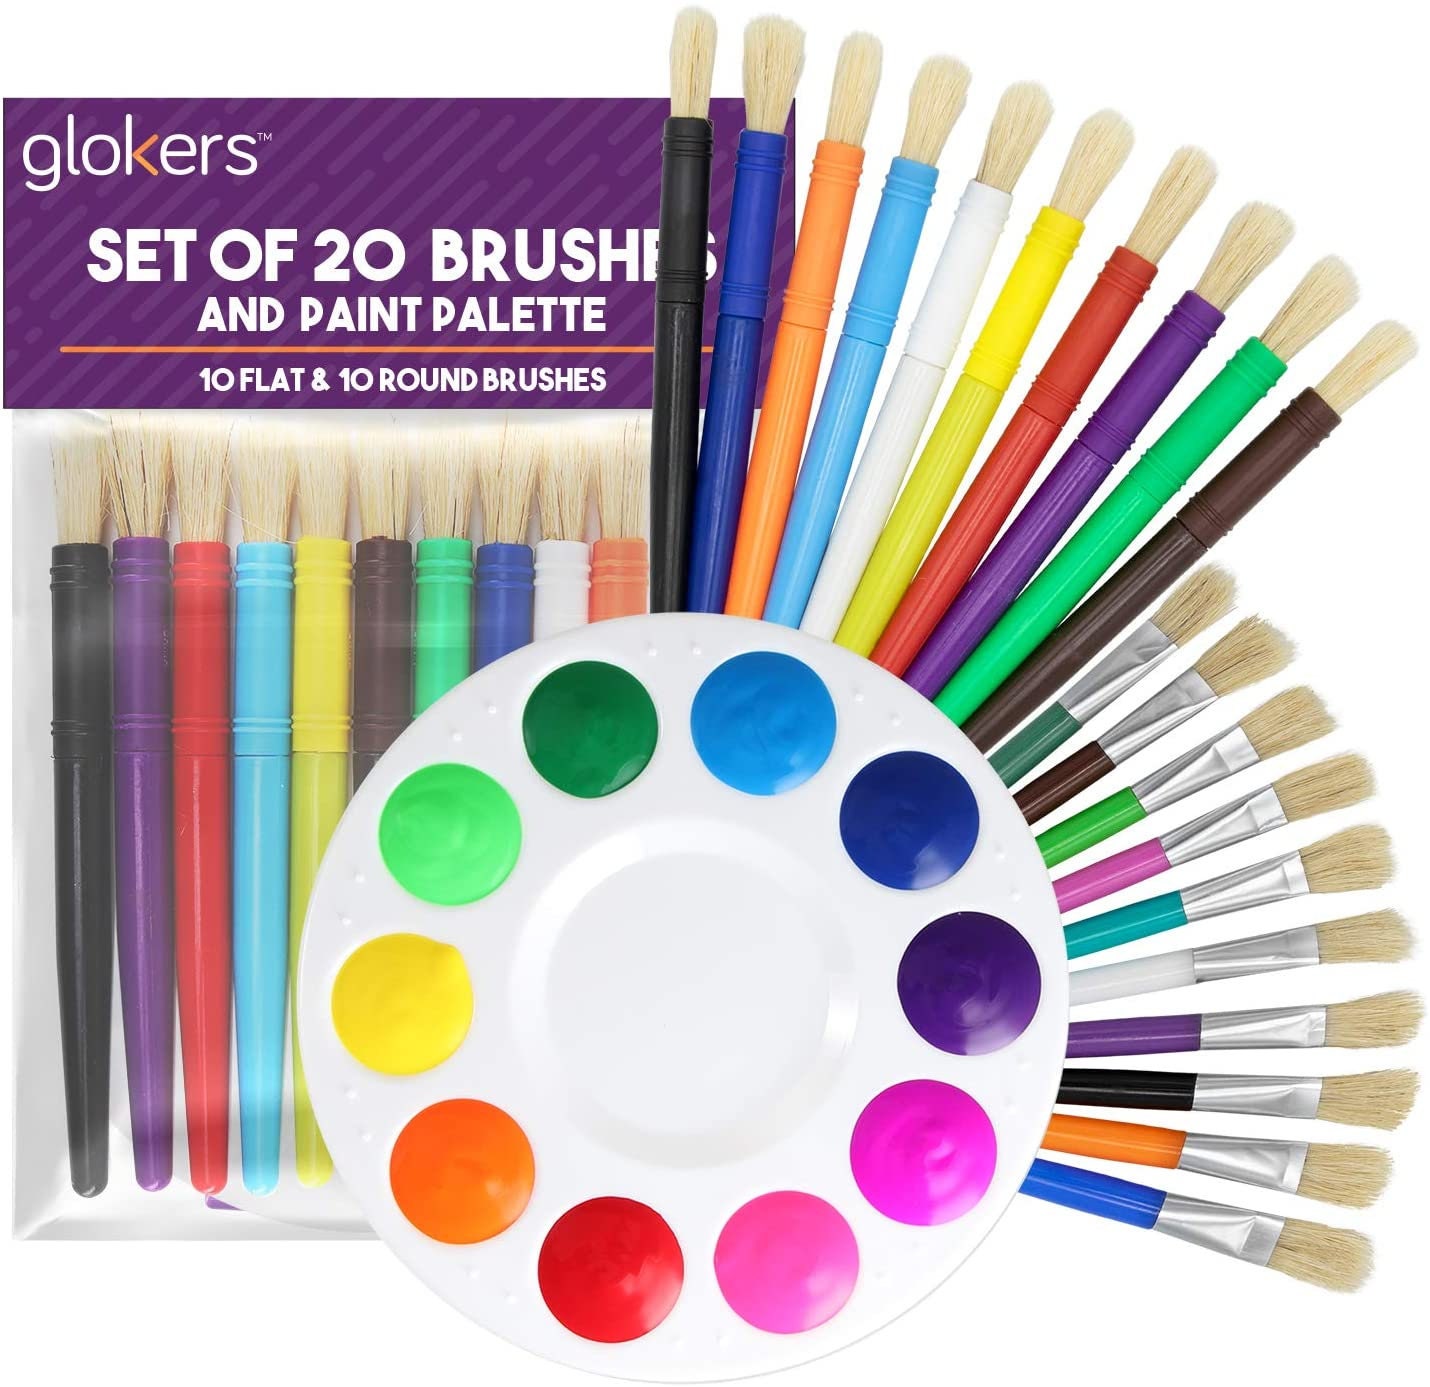 Finger Paint Paper Pad, Non-absorbent Stamp Art Premium Toddler